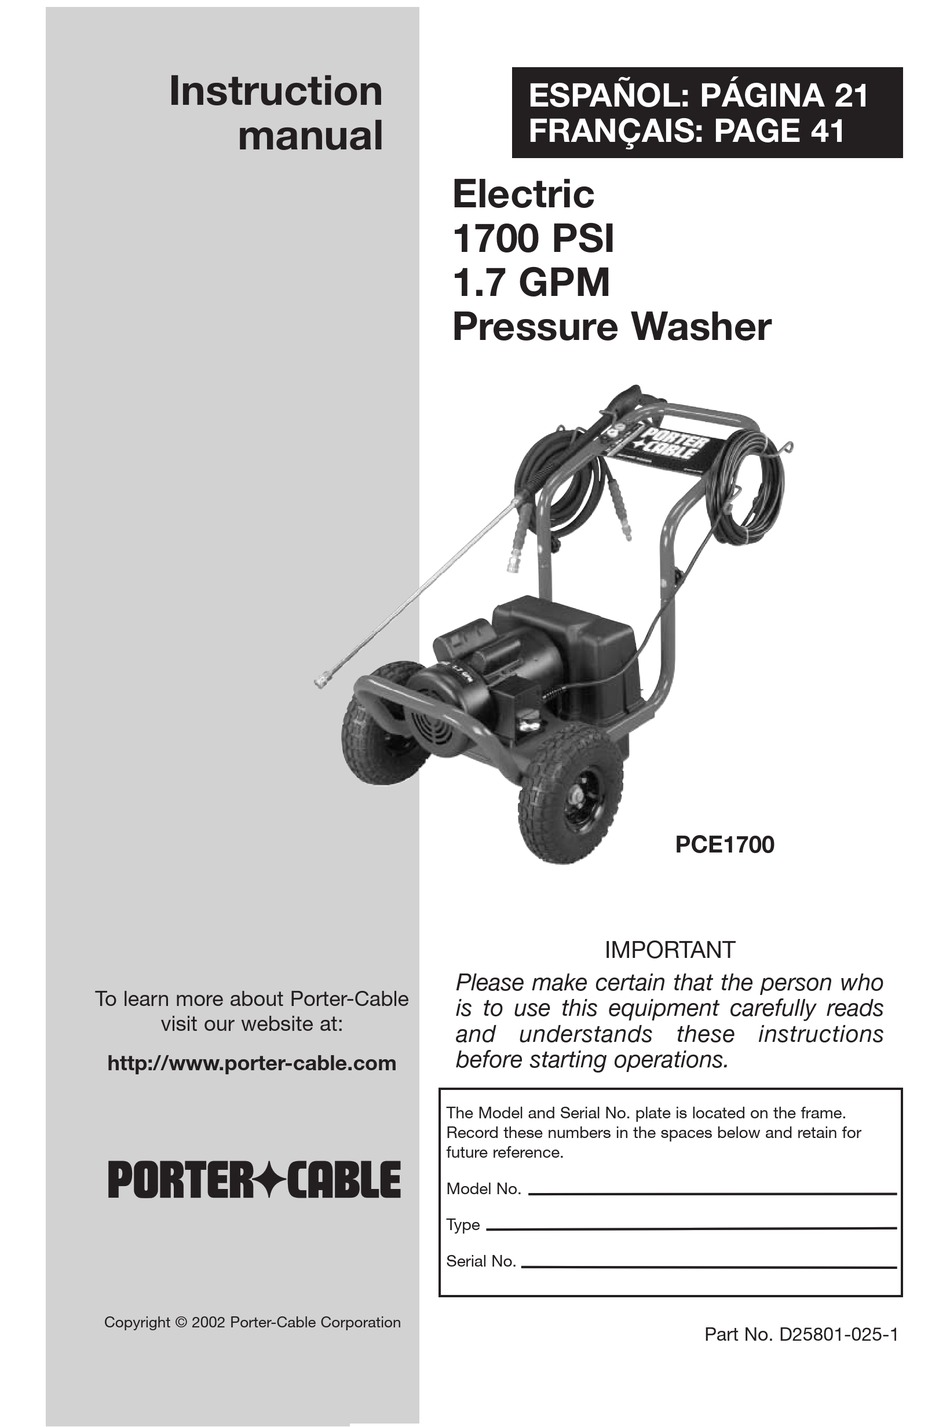 porter cable rt 5250 1 manual